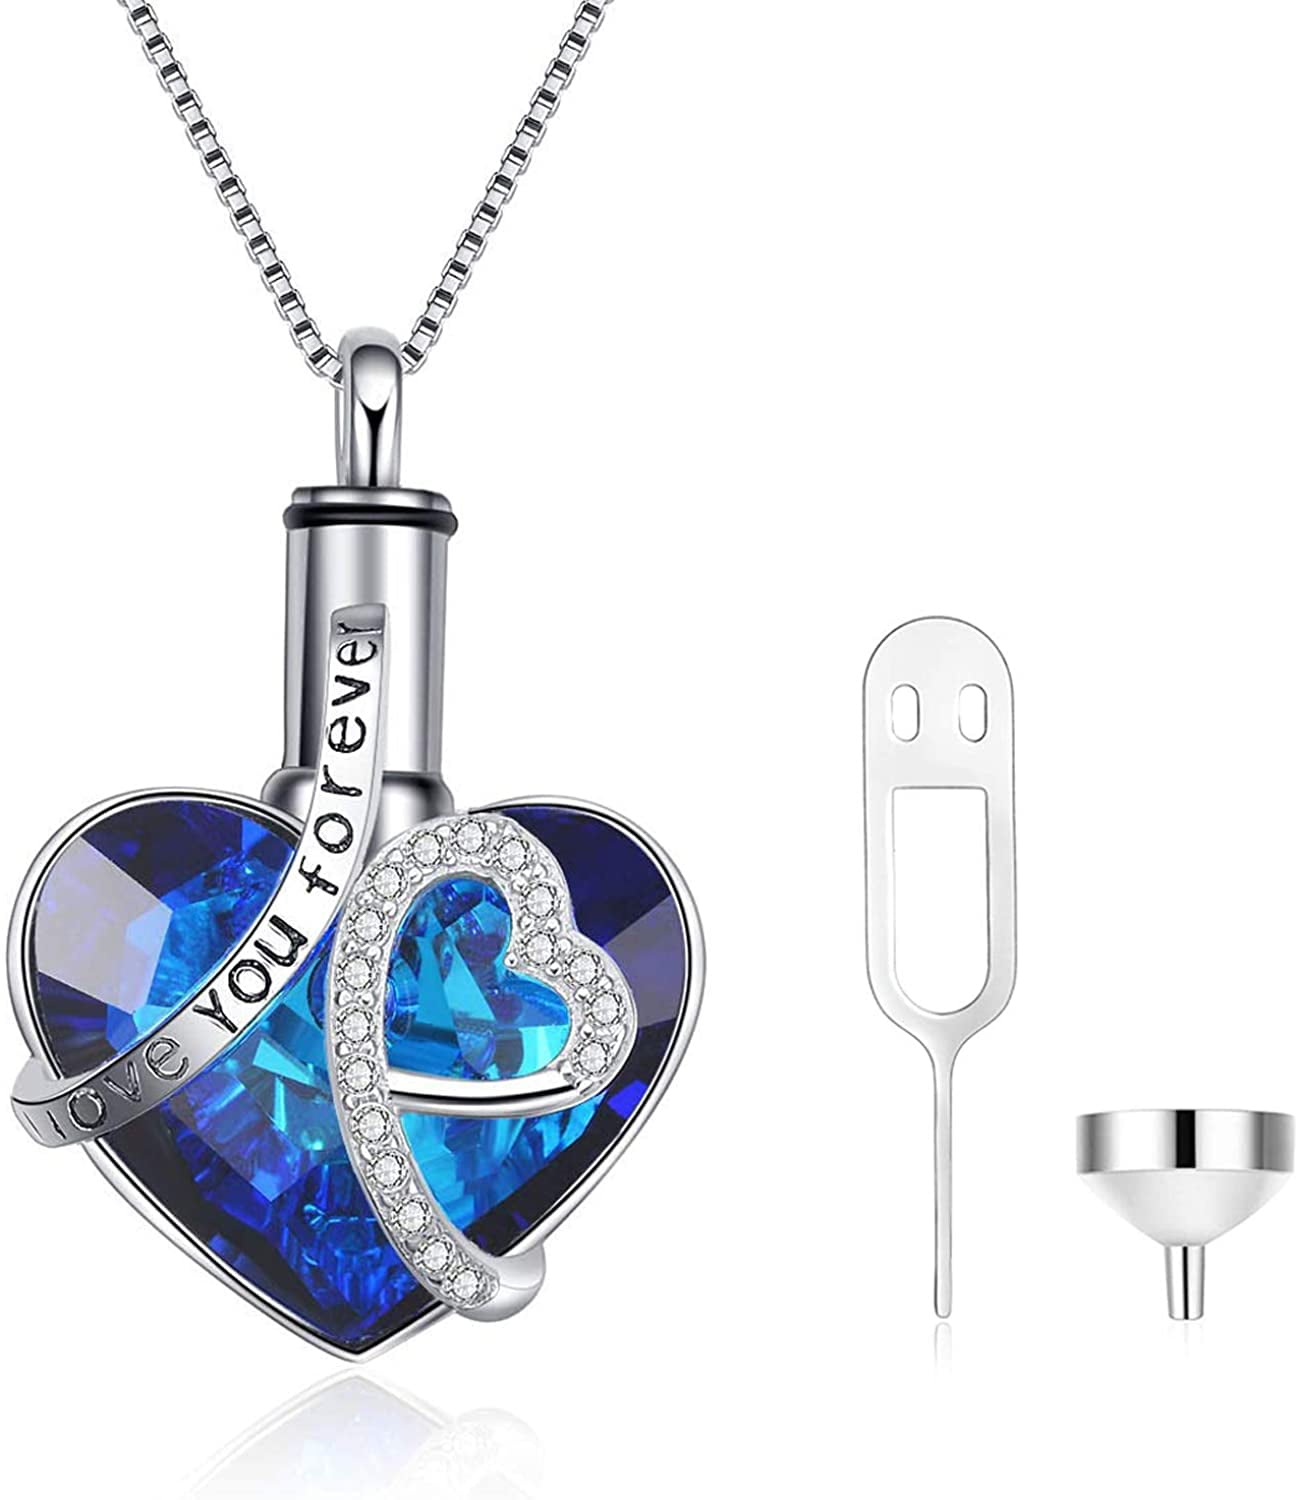 AOBOCO Heart Cremation Jewelry 925 Sterling Silver with Blue Crystal ...